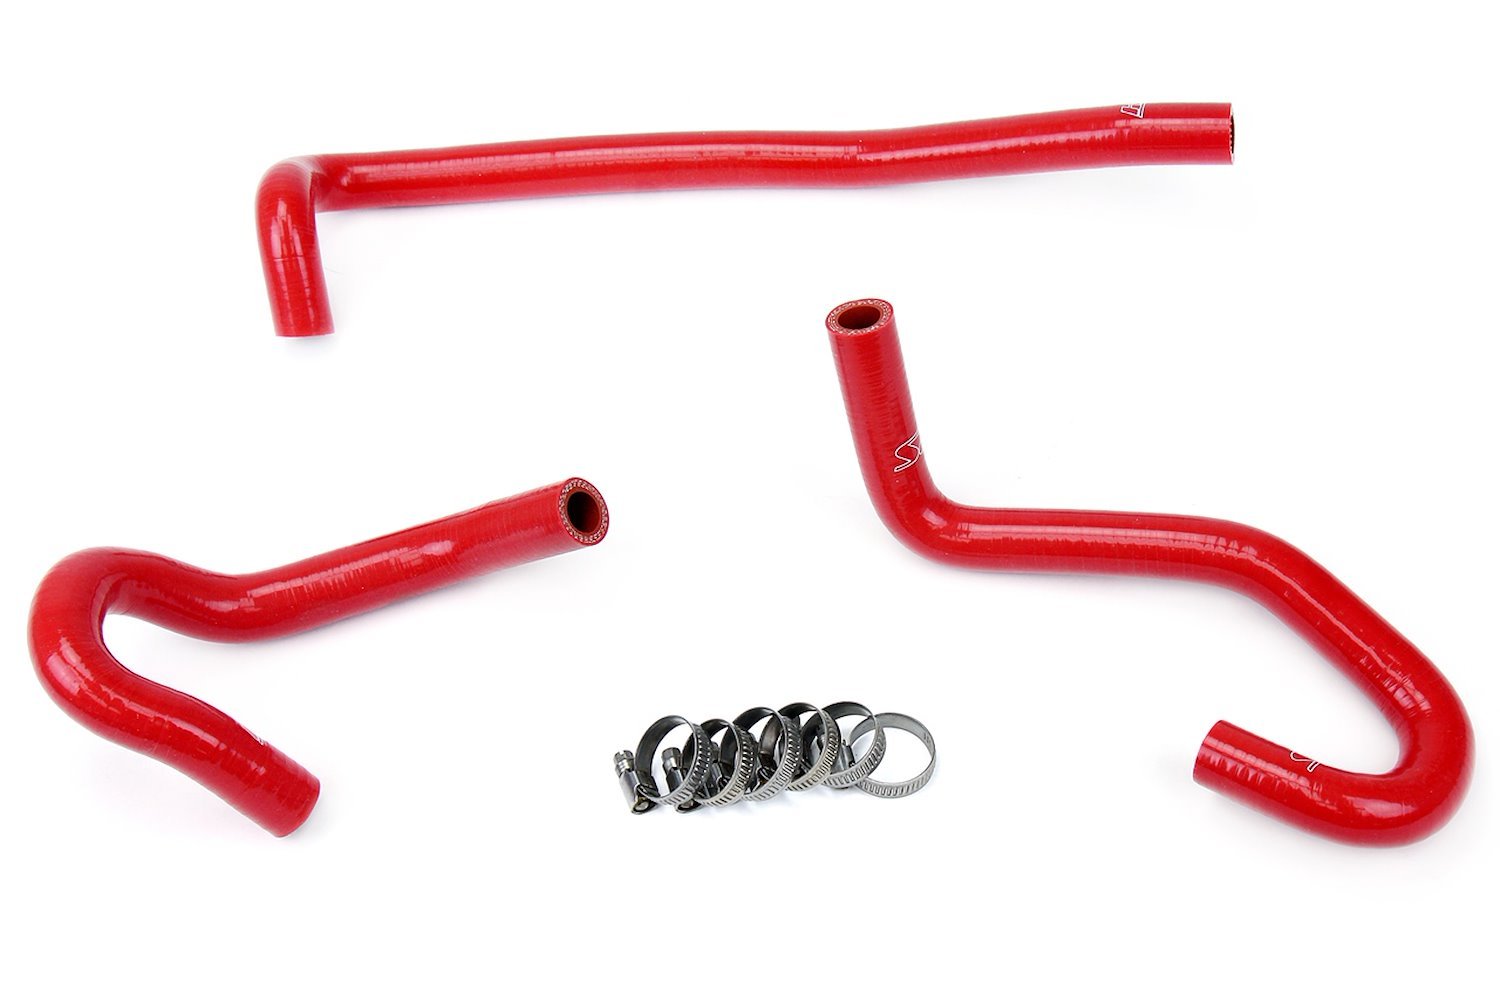 57-1340-RED Heater Hose Kit, High-Temp 3-Ply Reinforced Silicone, Replace OEM Rubber Heater Coolant Hoses